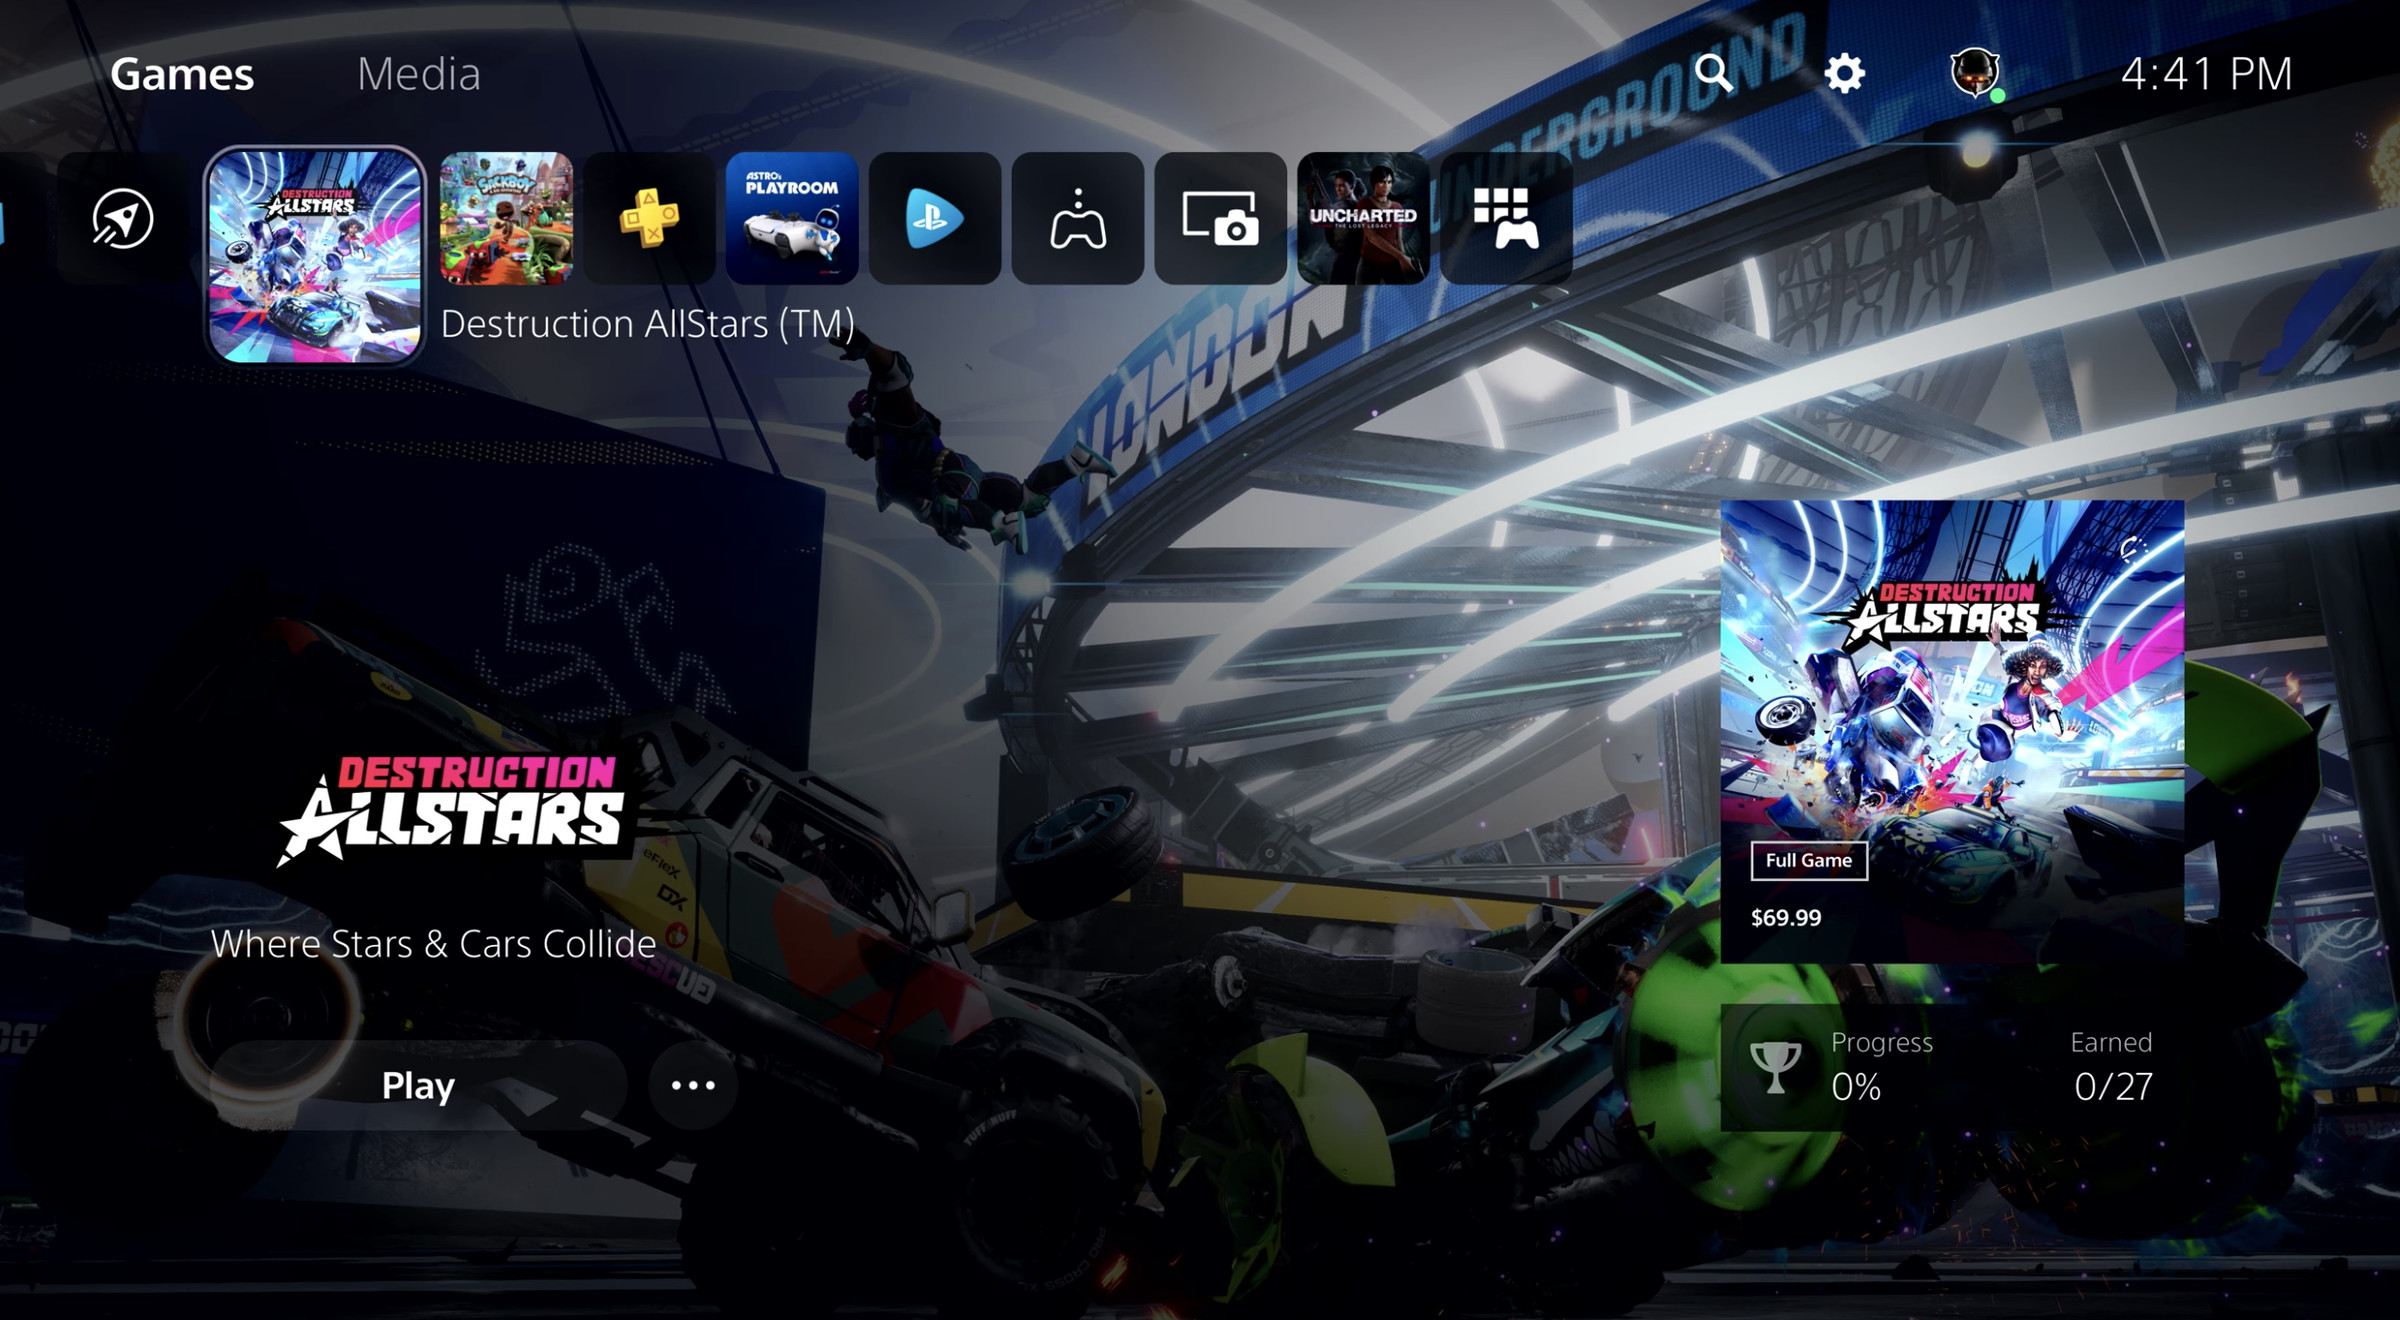 The new PlayStation 5 home screen.